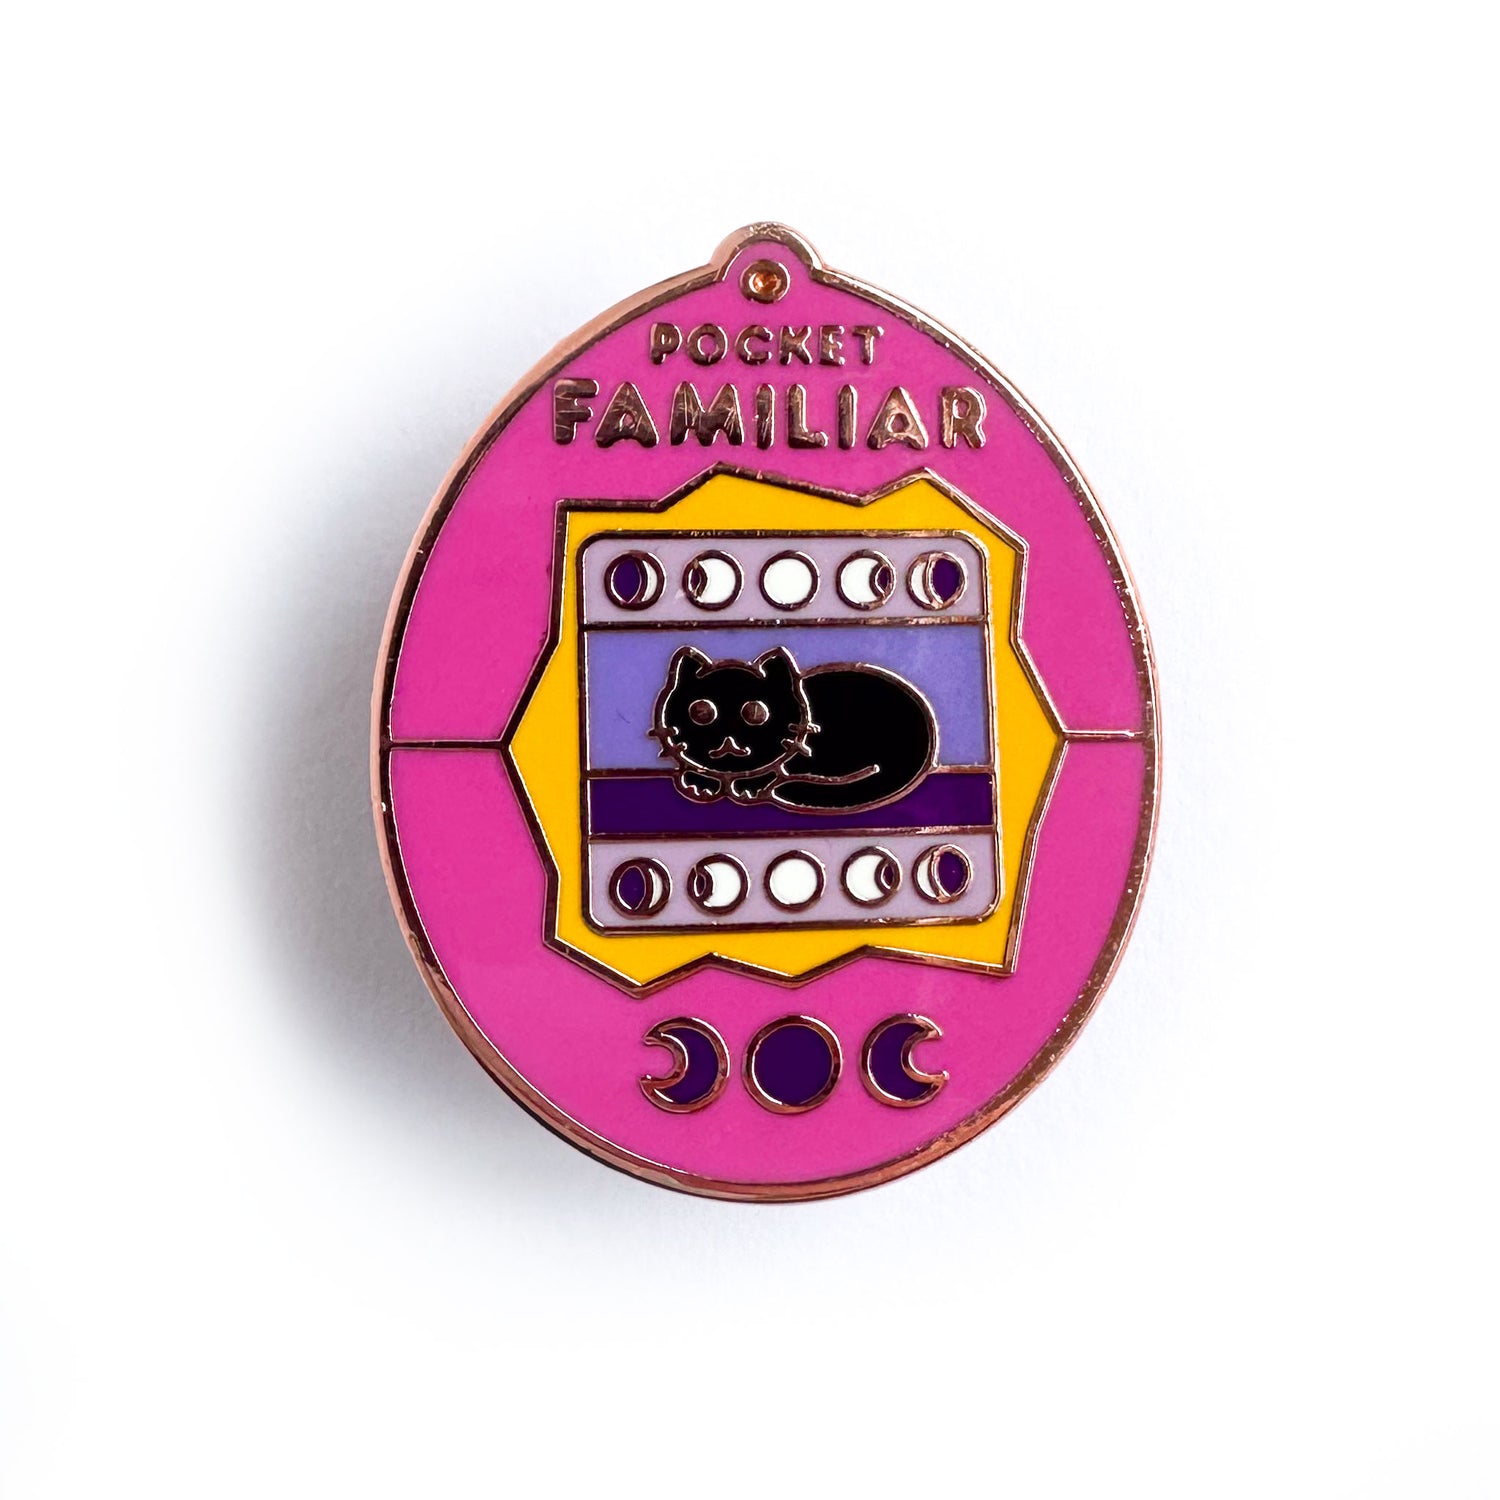 An enamel pin in the shape of a tamagotchi virtual pet. It has a black cat on the screen and reads "Pocket Familiar" across the top. It is a pink shell with yellow details.